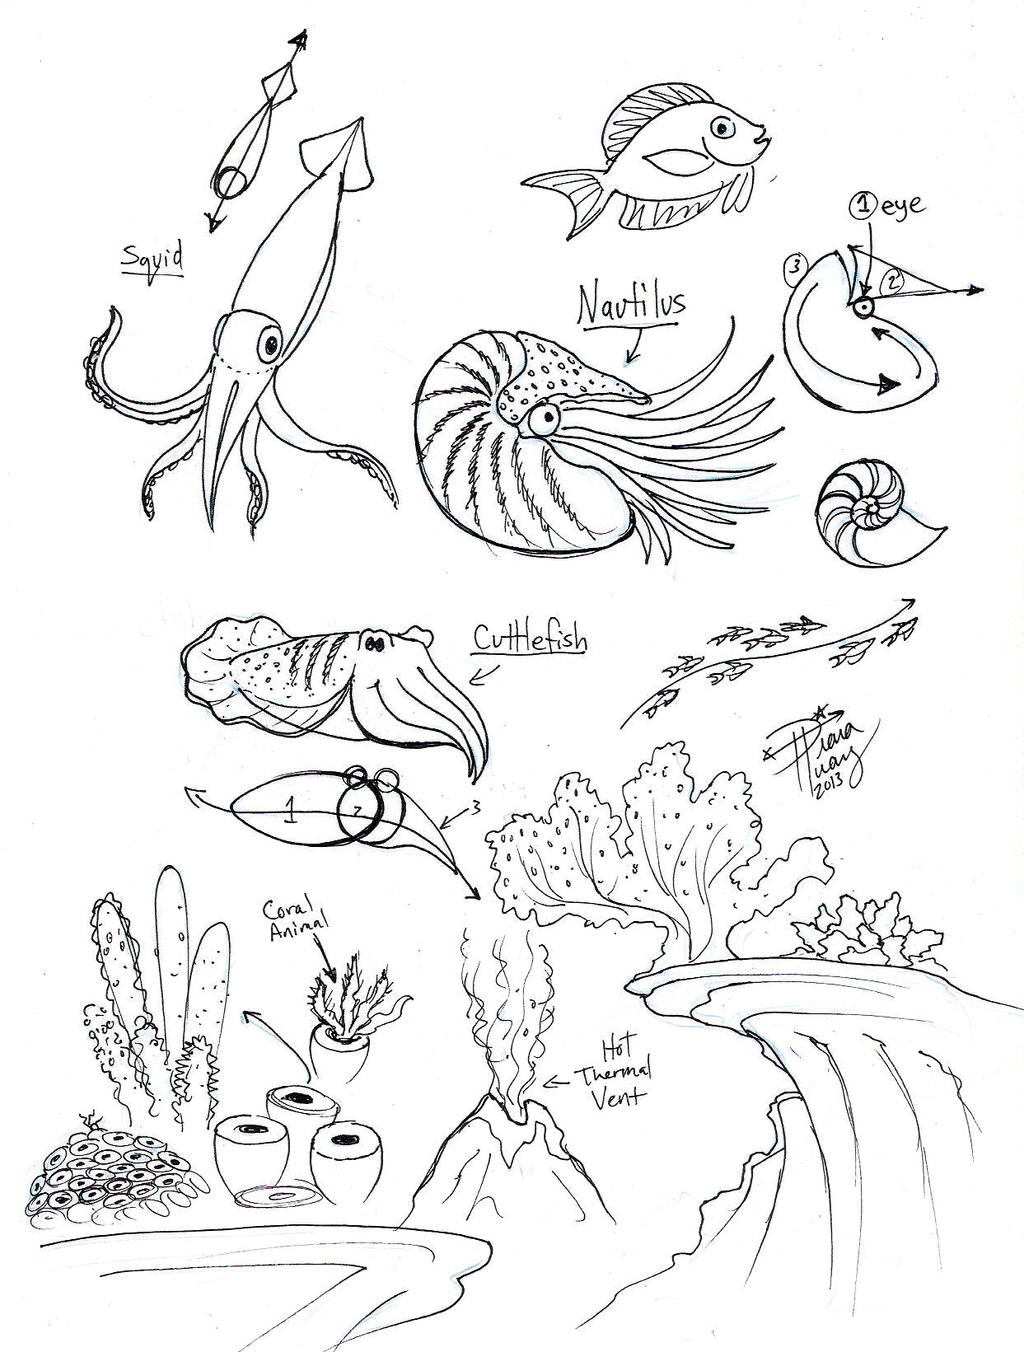 Draw Squid Nautilus Cuttlefish by Diana-Huang on DeviantArt